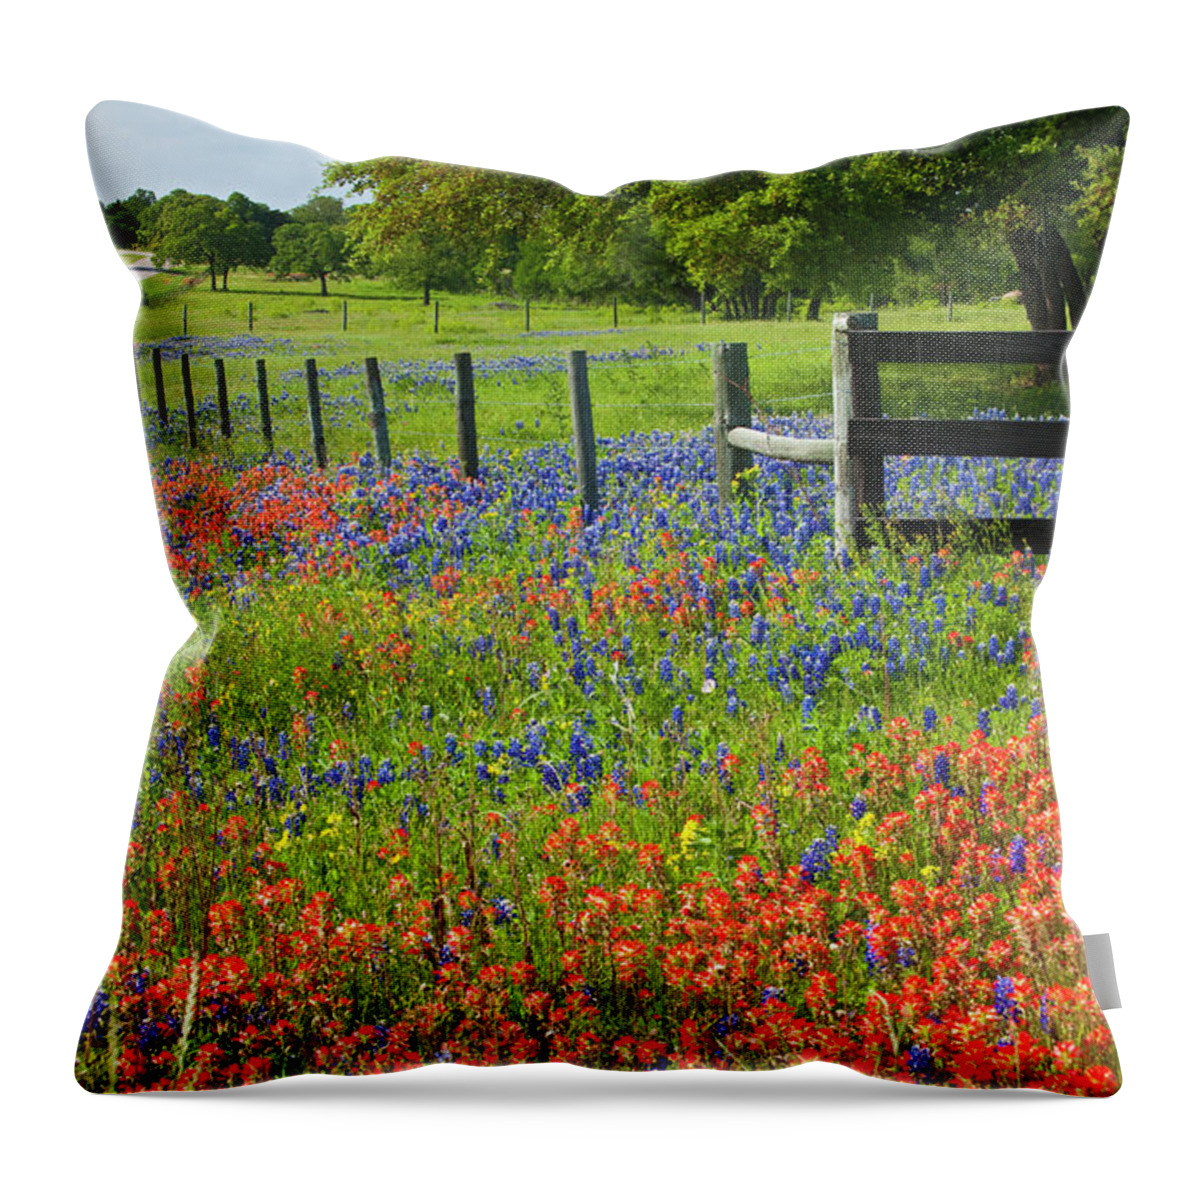 Abundance Throw Pillow featuring the photograph Follow the Fence by Eggers Photography